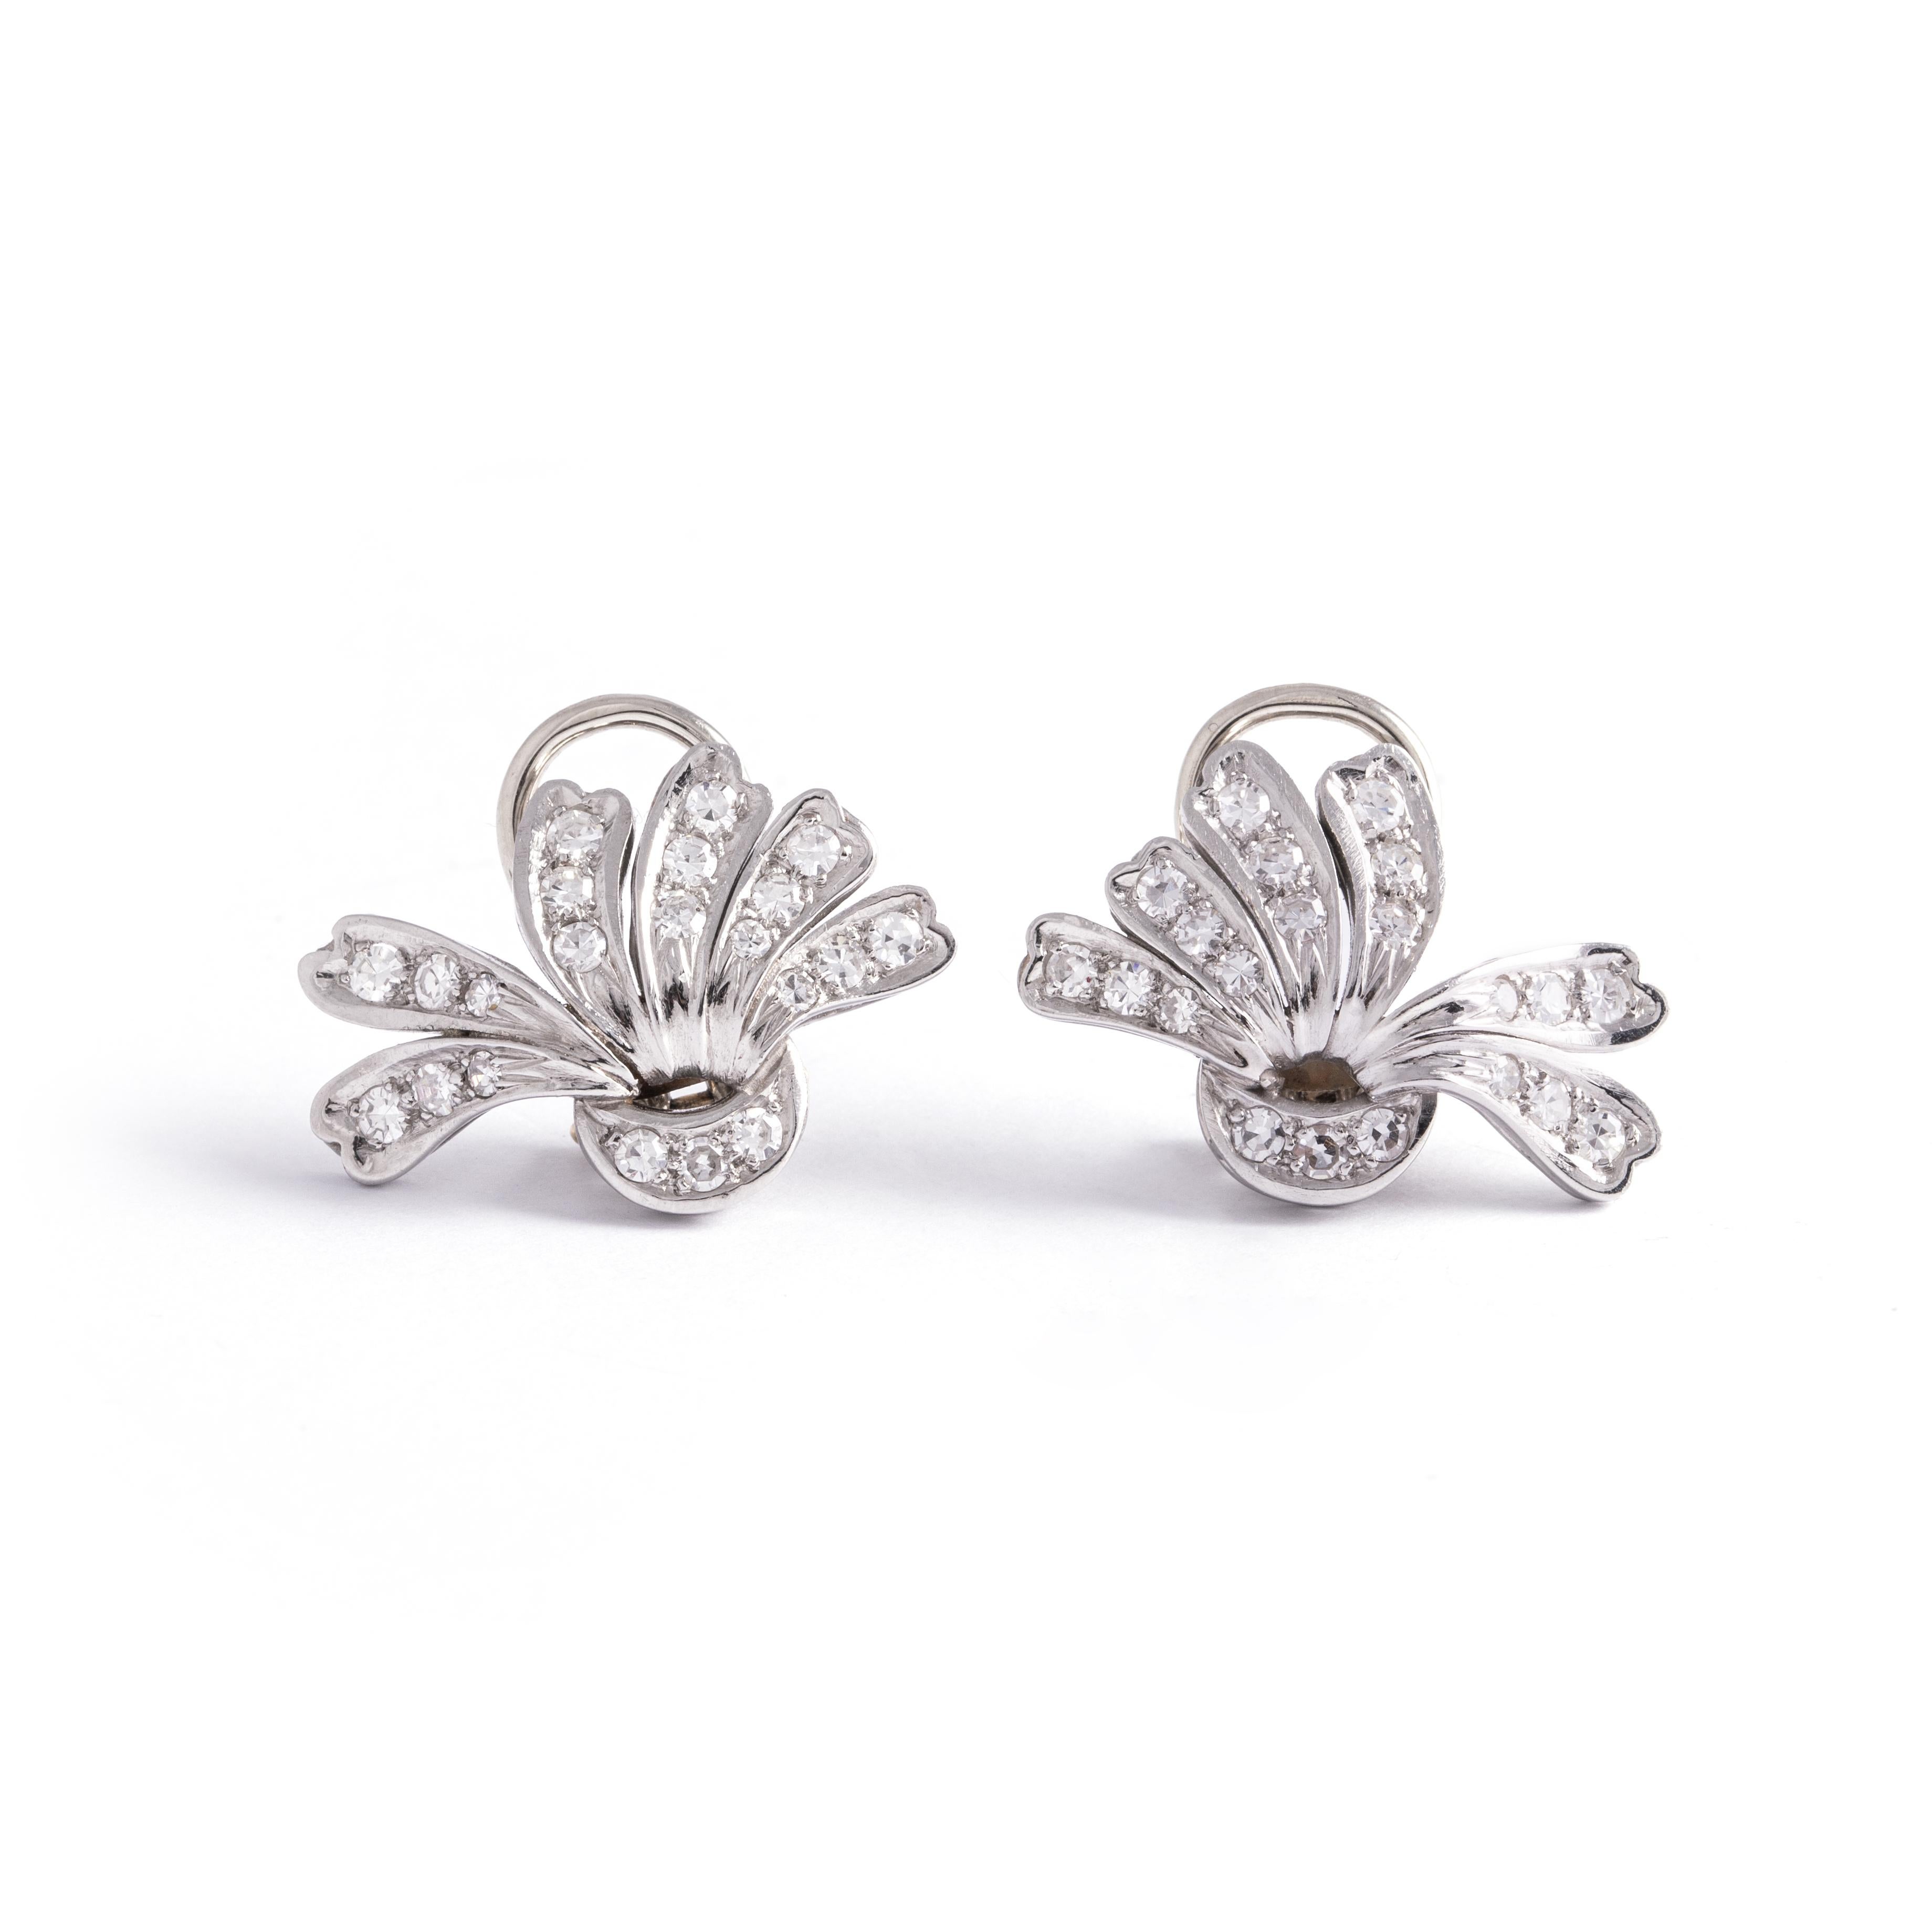 Platinum and white gold 18K earrings with round-cut diamonds.
Dimensions: 2.65 centimeters x 2.40 centimeters.
Gross weight: 9.77 grams.